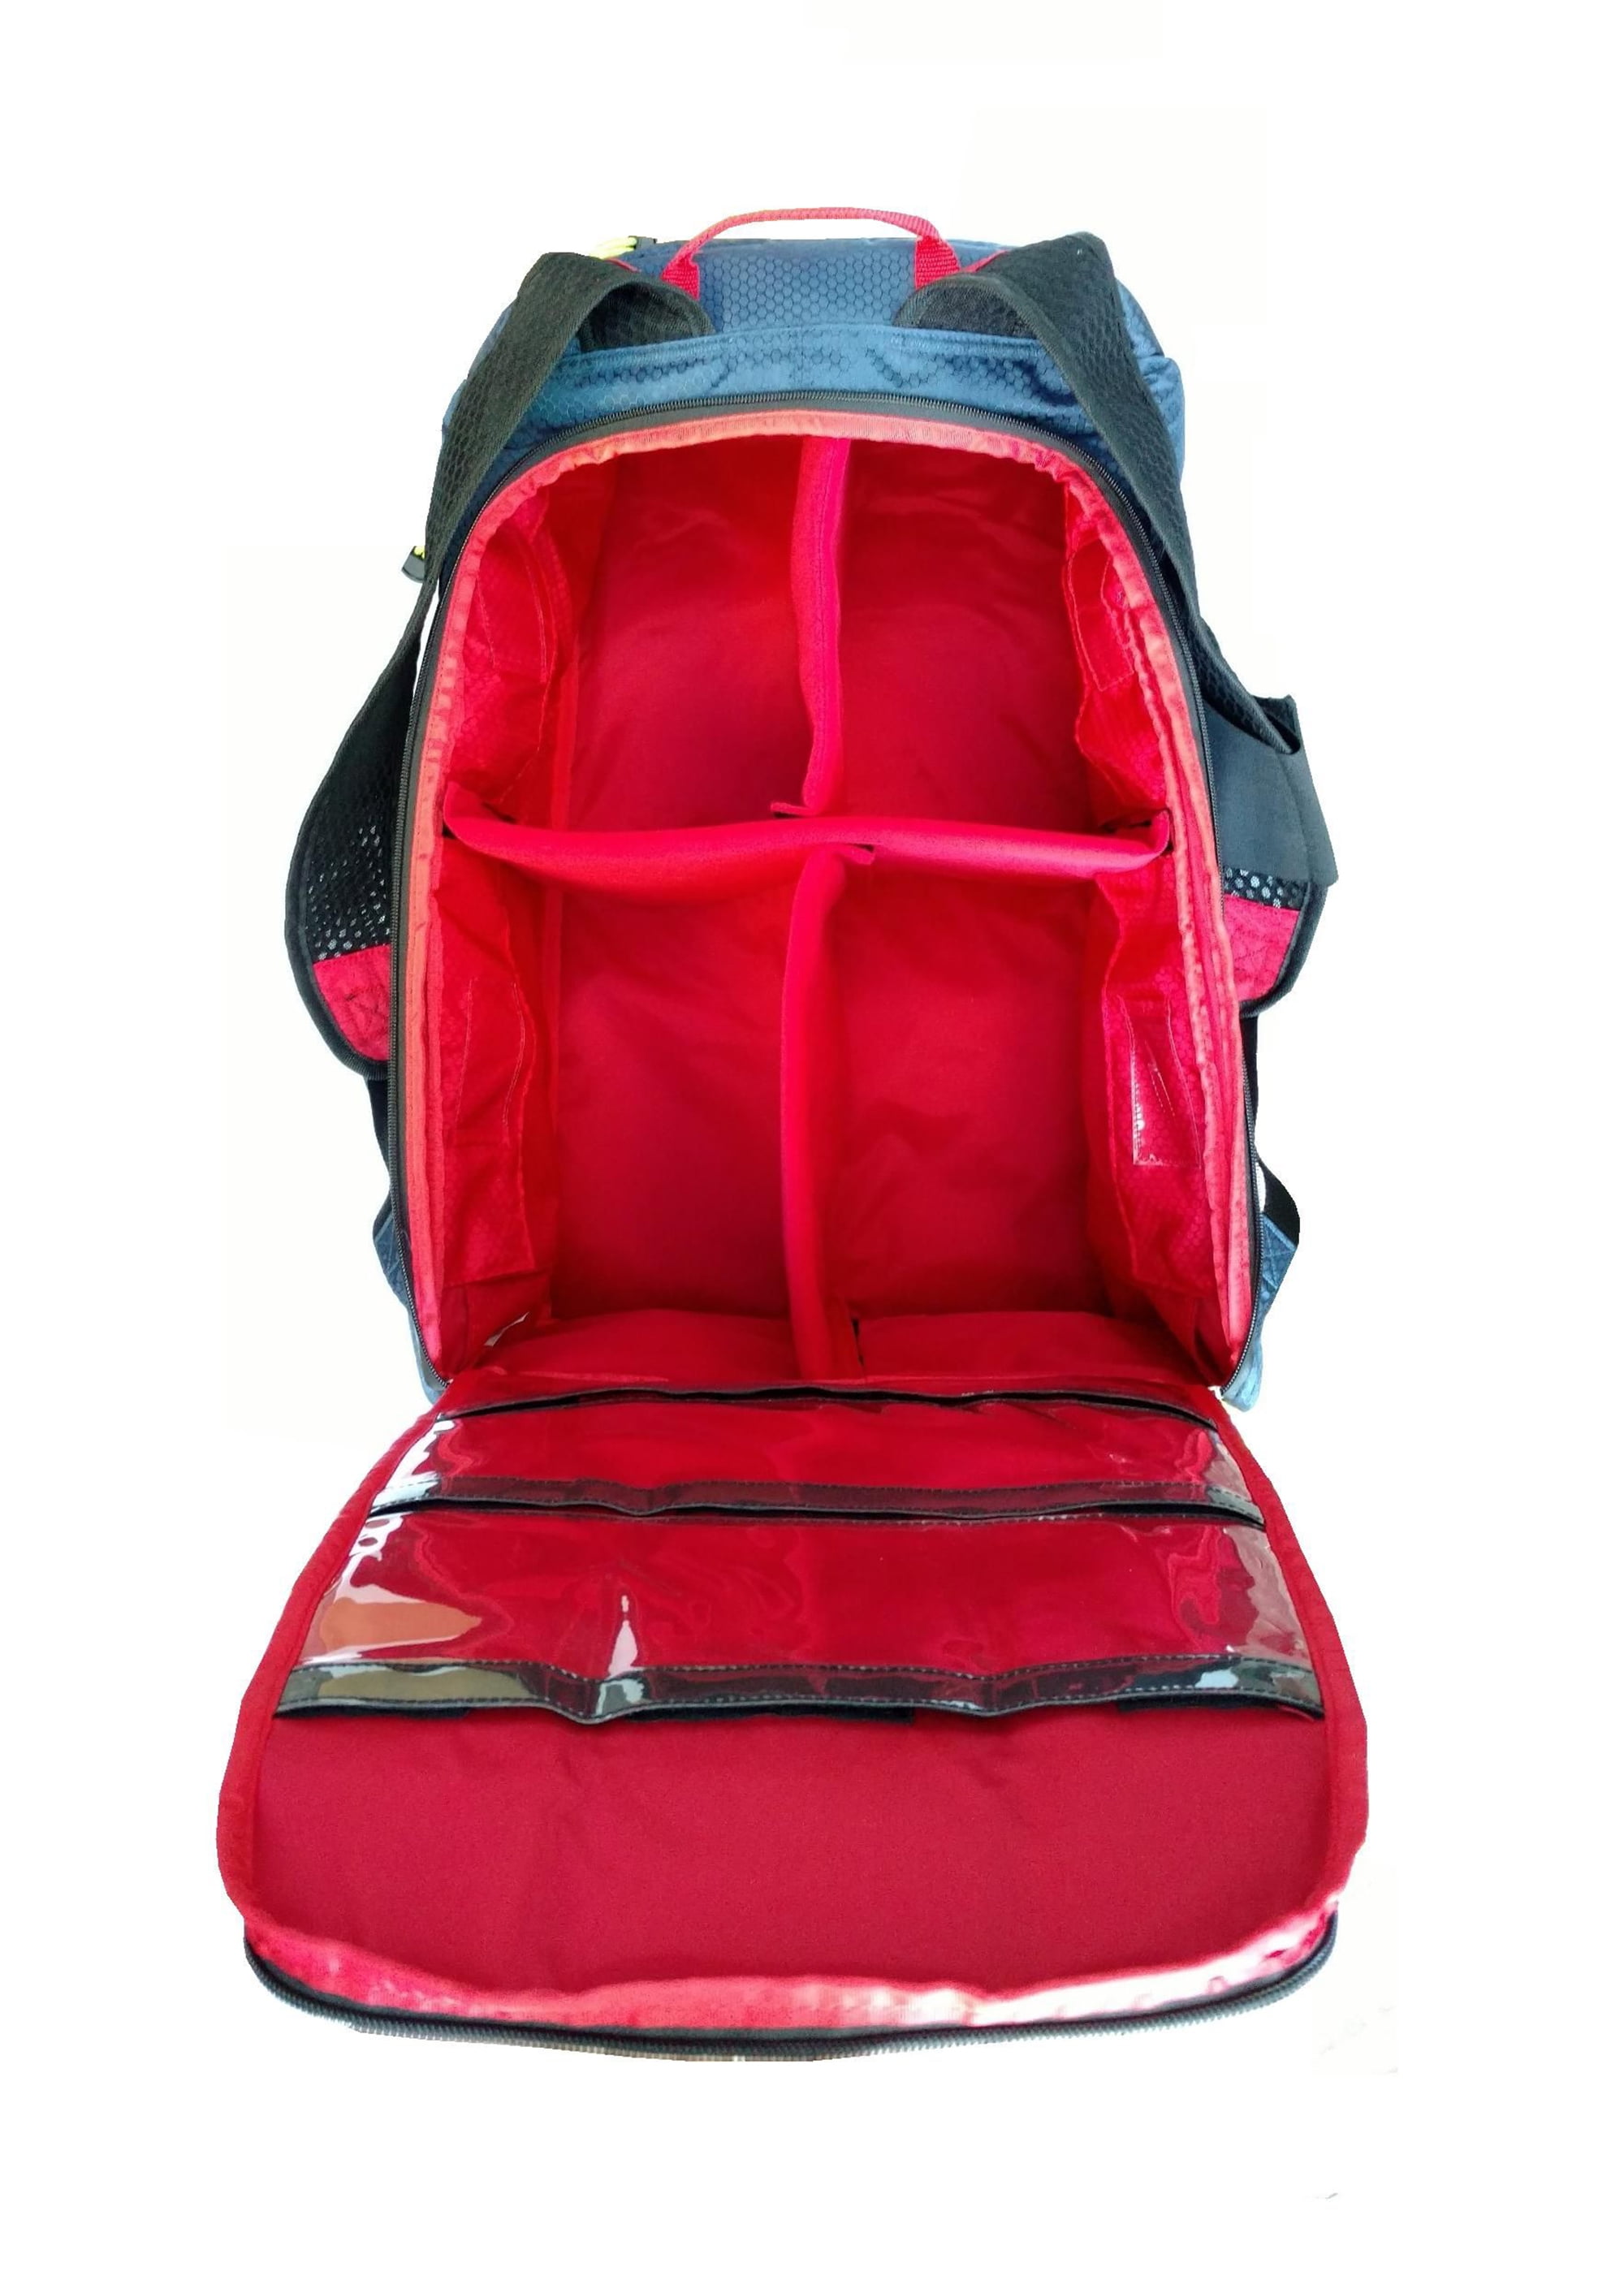 Inspire Bags VICTORY 45 LTR Travel Backpack with Rain cover(Black) 45 L  Laptop Backpack Black - Price in India | Flipkart.com